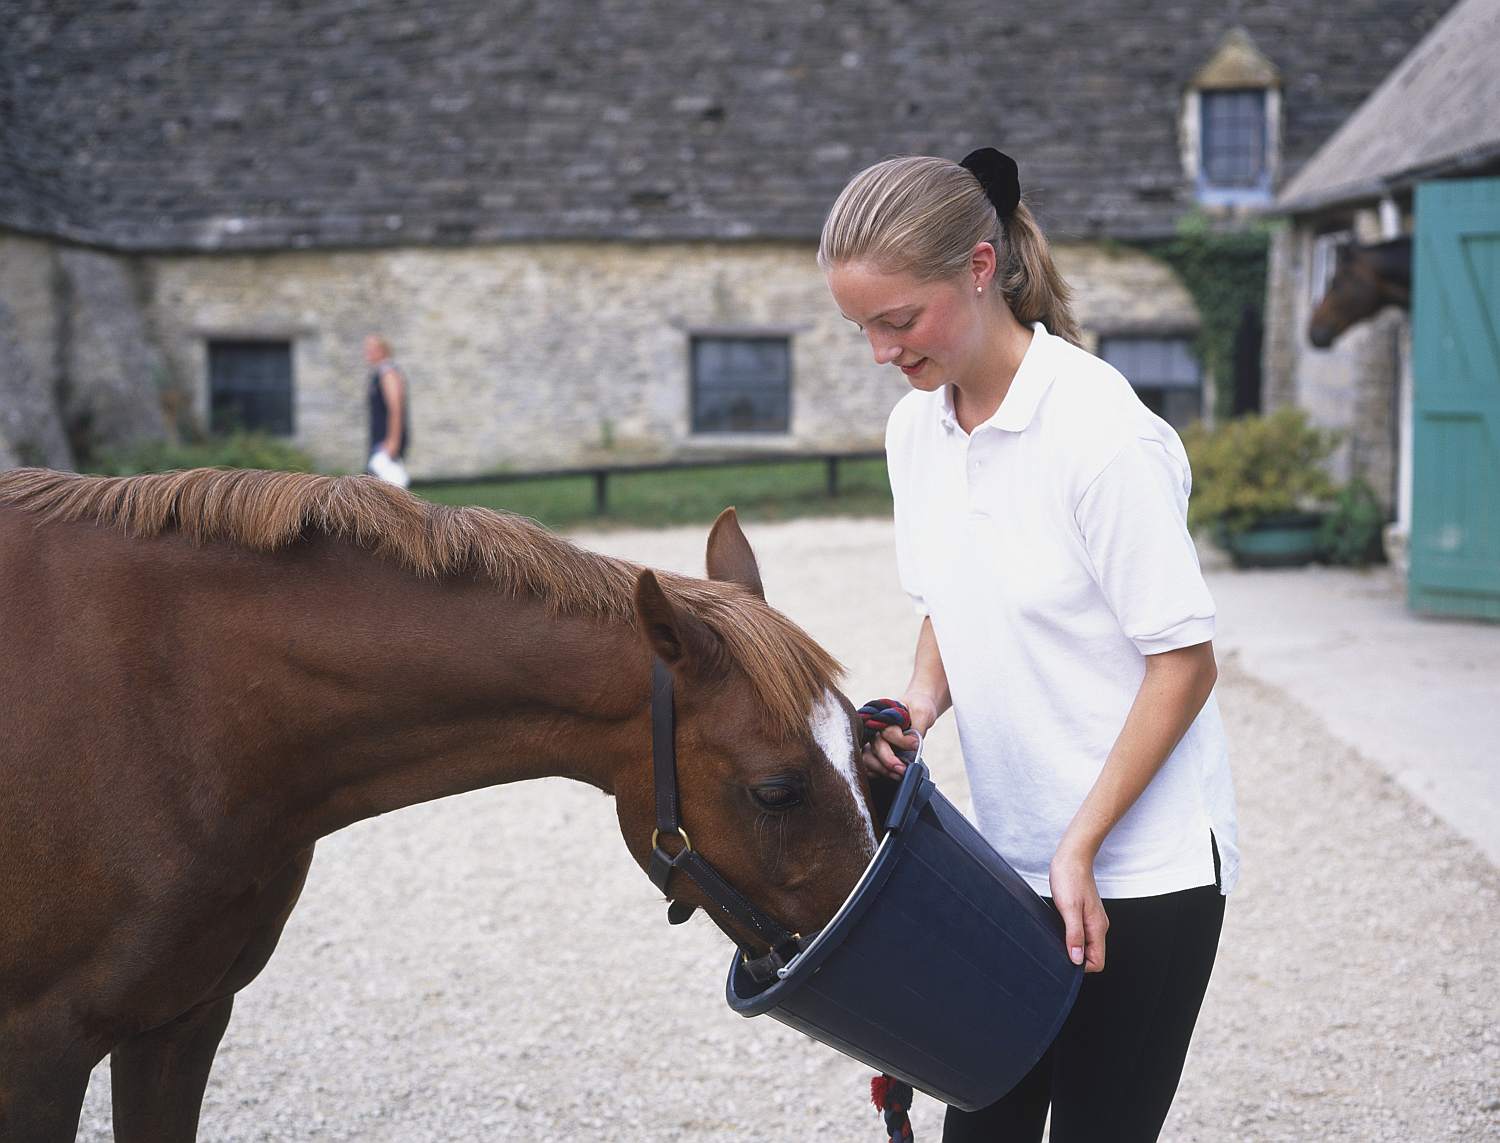 Girl feeding brown horse out of bucket.